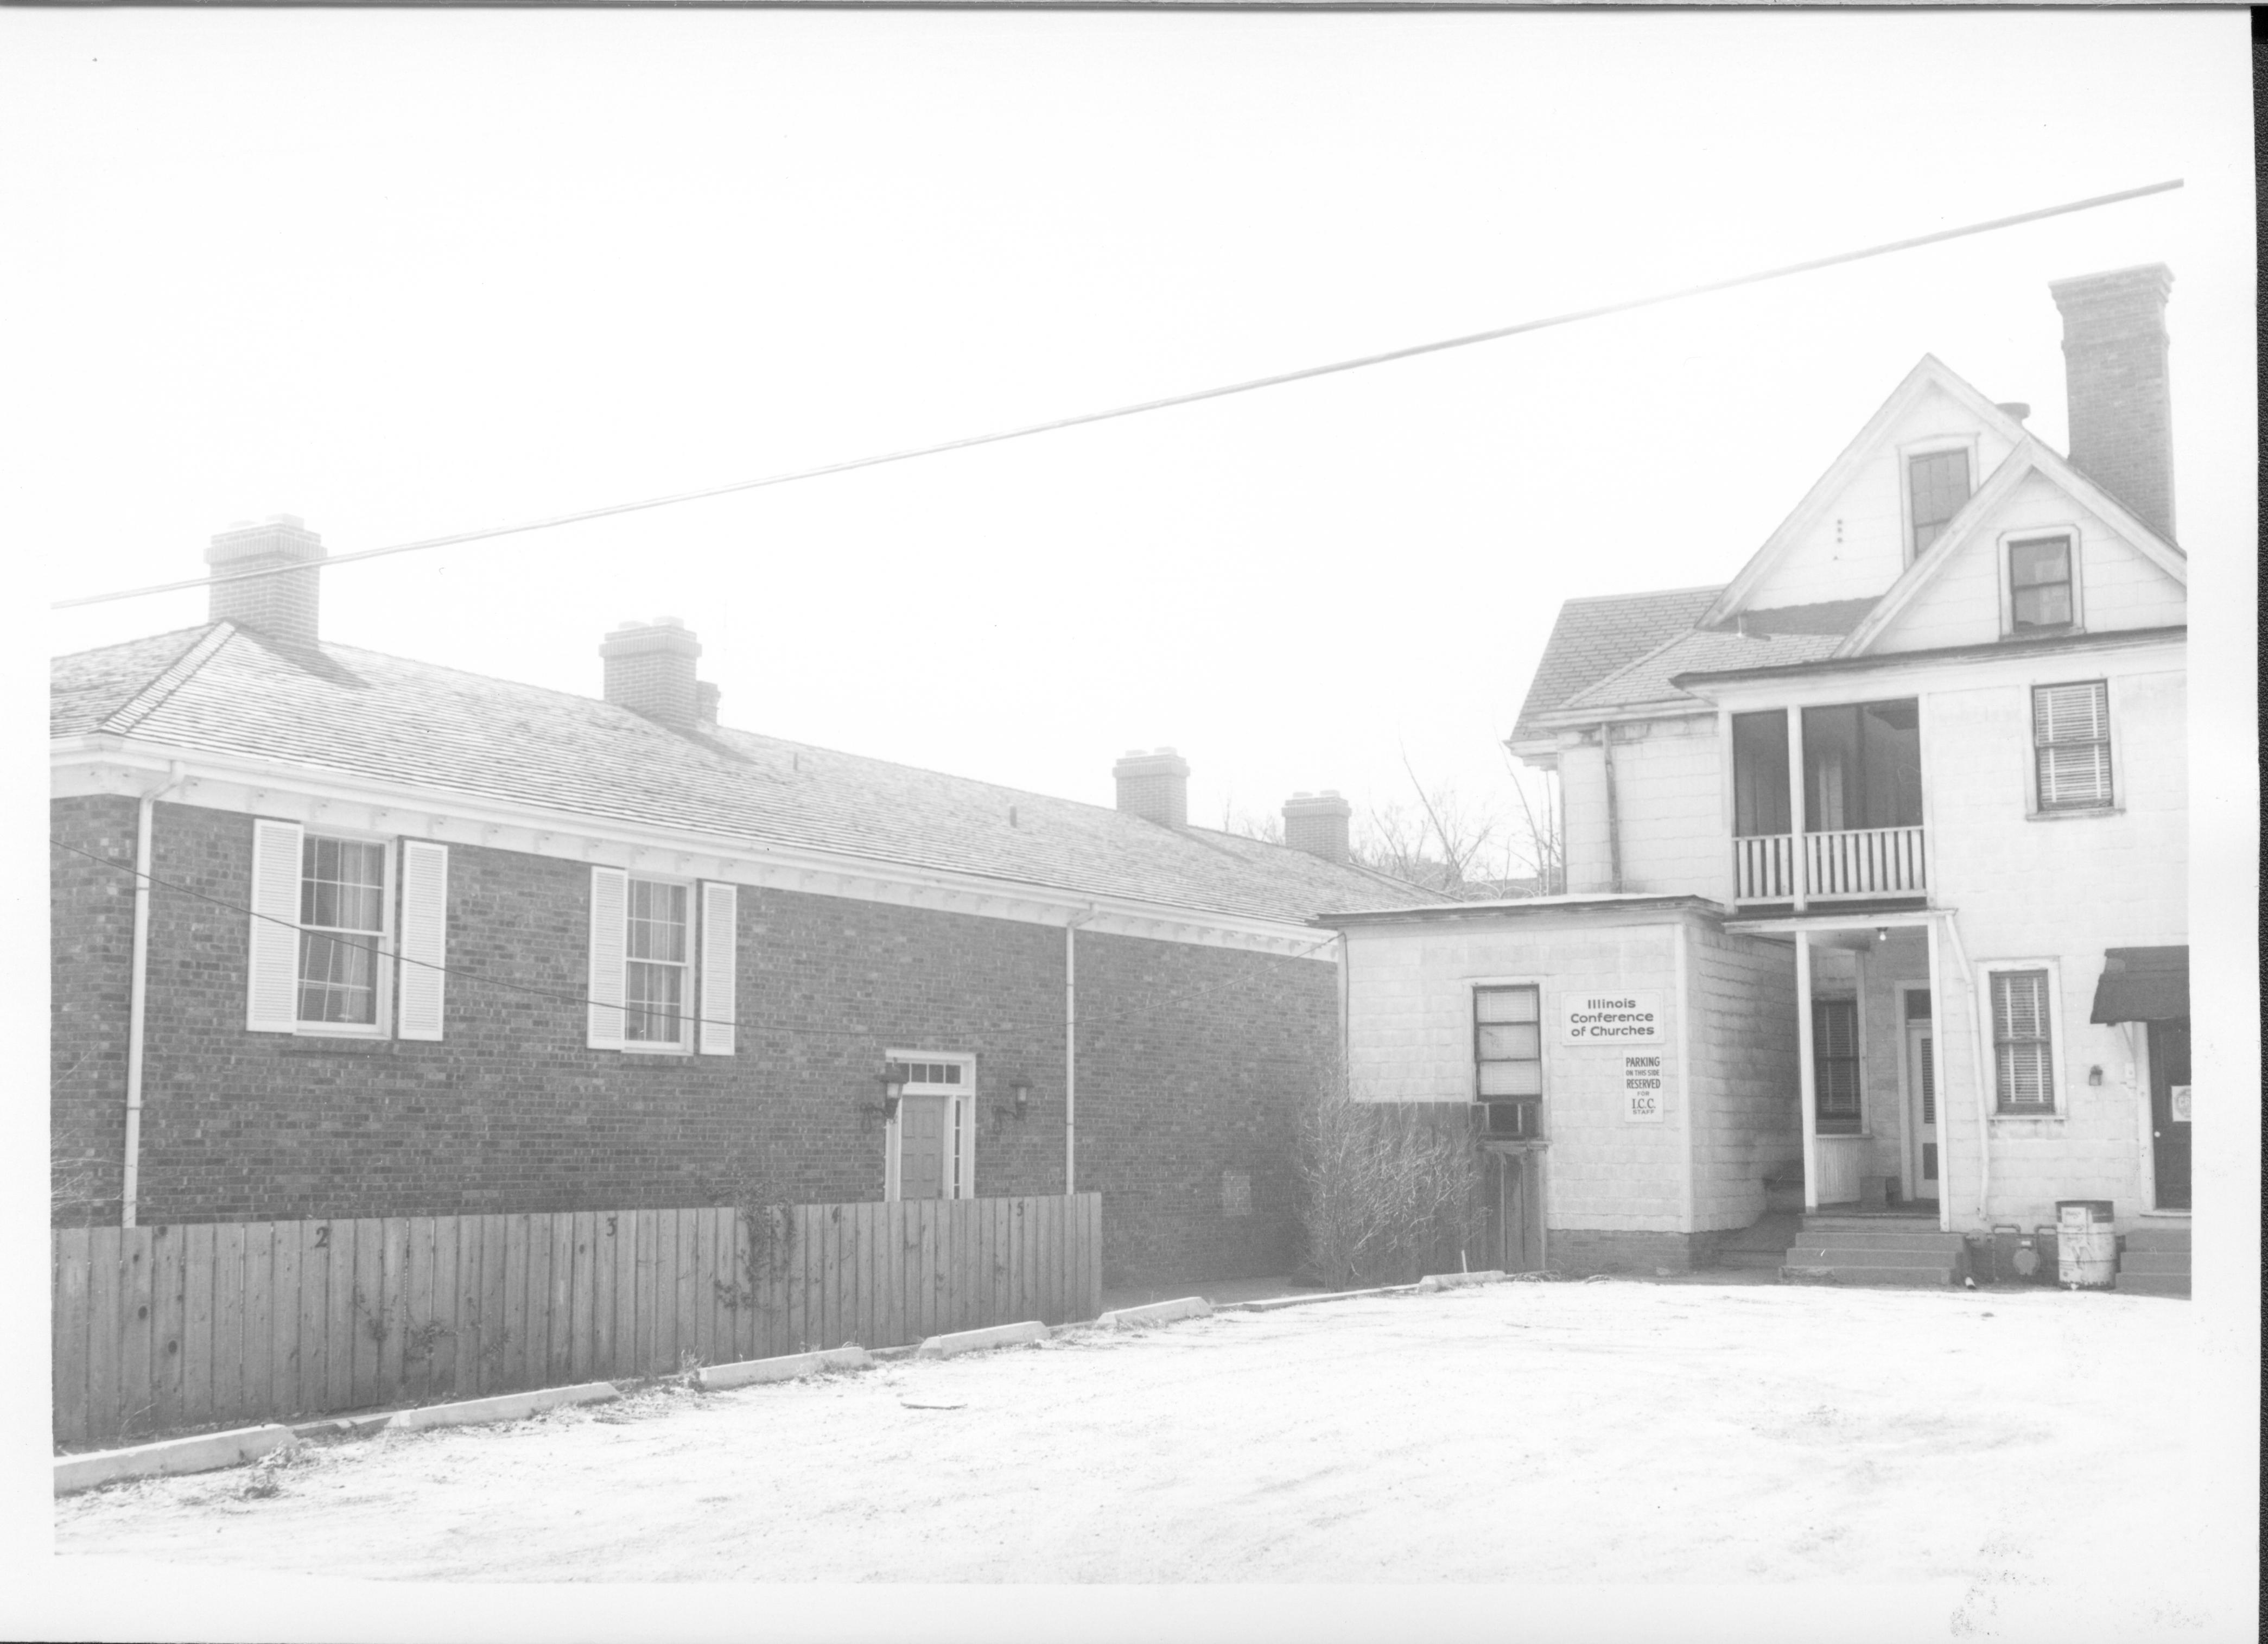 Building on left belonged to Evelyn Grummon and used by Springfield Marine Bank.  Labeled ast the Barrister Building.  House on right owned by Eugene McNally and used by the Illinois Conference of Churches and CROP.  Located on Block 7, Lots 5 & 6 along 7th Street where Visitor Center is now. Looking West/Southwest. Springfield Marine Bank, Grummon, Barrister Building, McNally, Illinois Conference of Churches, CROP, Visitor Center